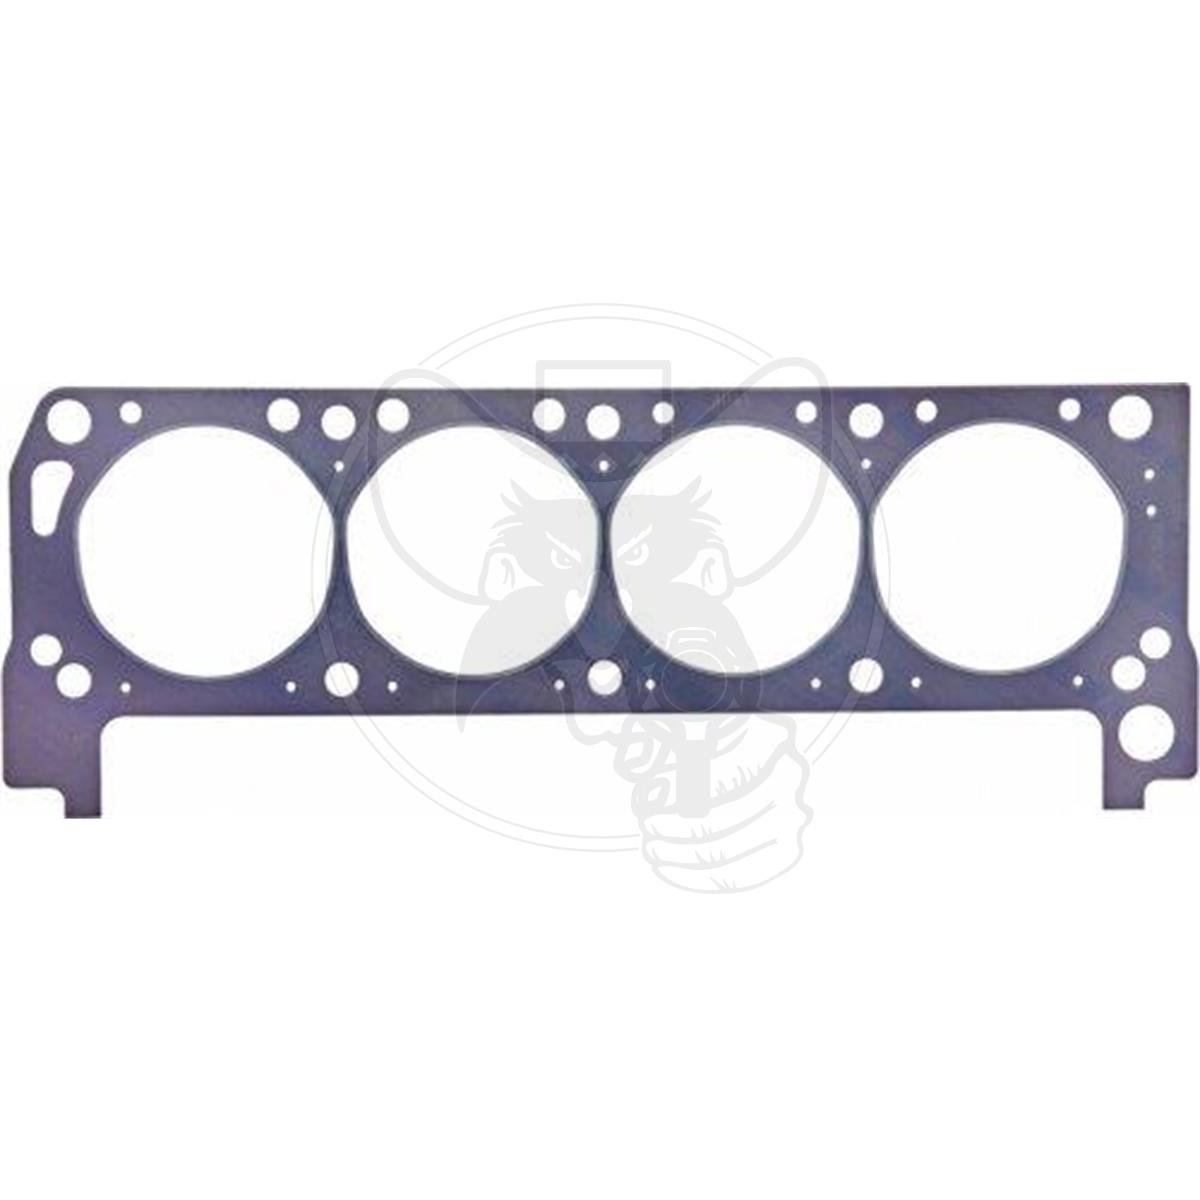 FELPRO CYLINDER HEAD GASKET FITS FORD CLEVELAND 302-351 4.1" BORE-EACH